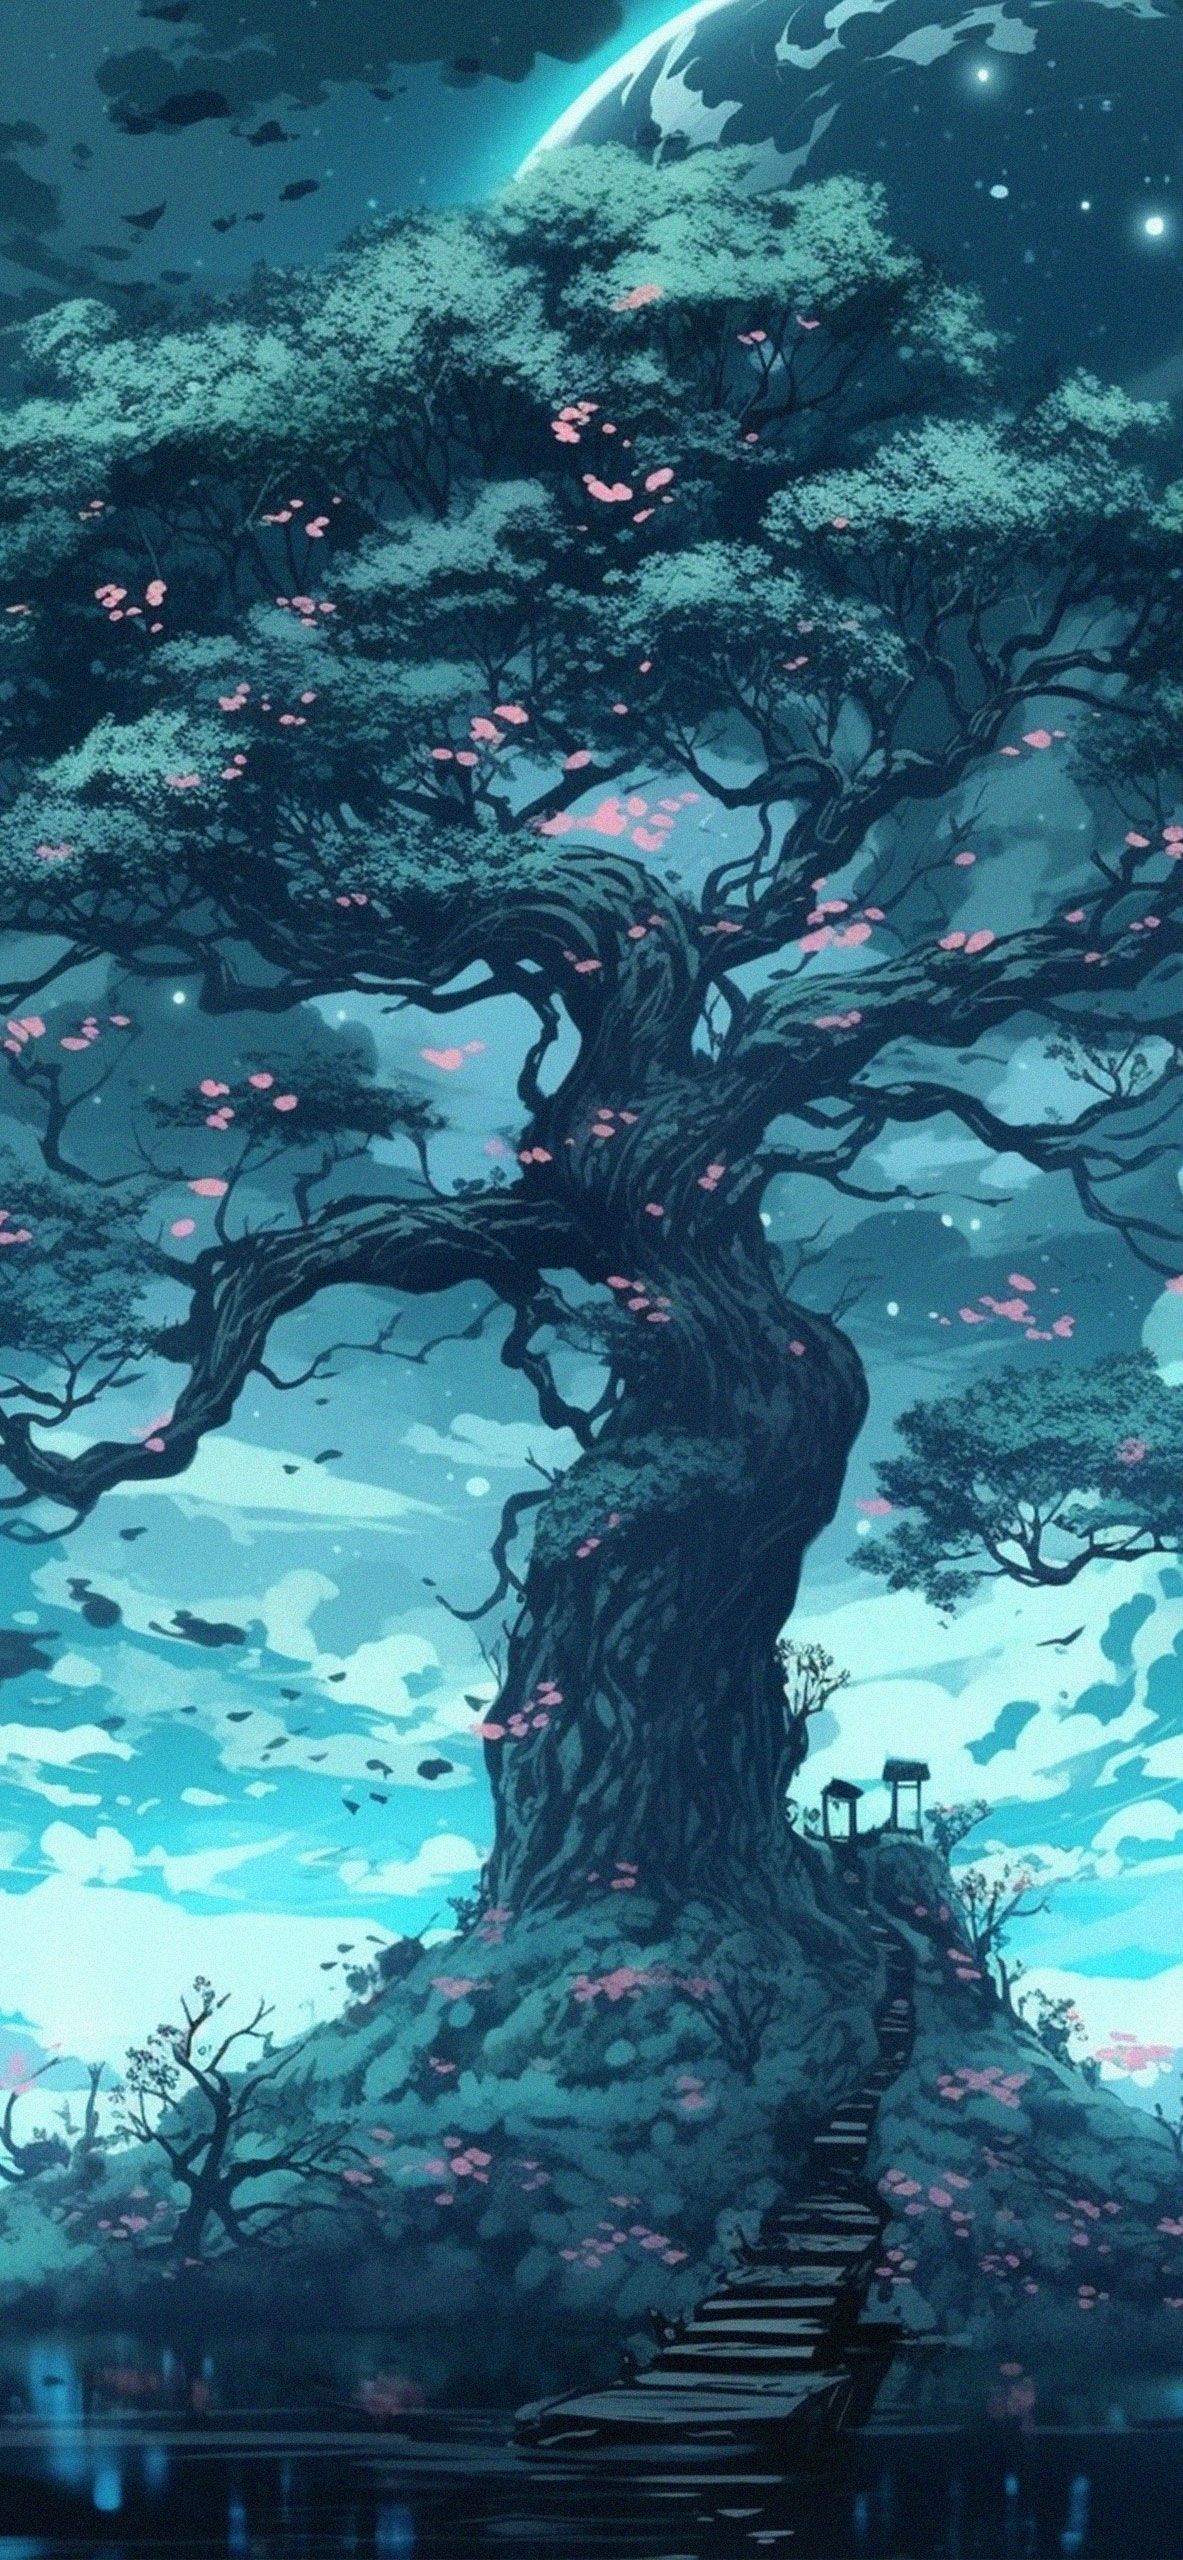 Anime tree, a tree in the anime style, beautiful tree, fantasy tree, tree in the night, anime scenery, anime wallpaper, wallpaper, phone wallpaper - Beautiful